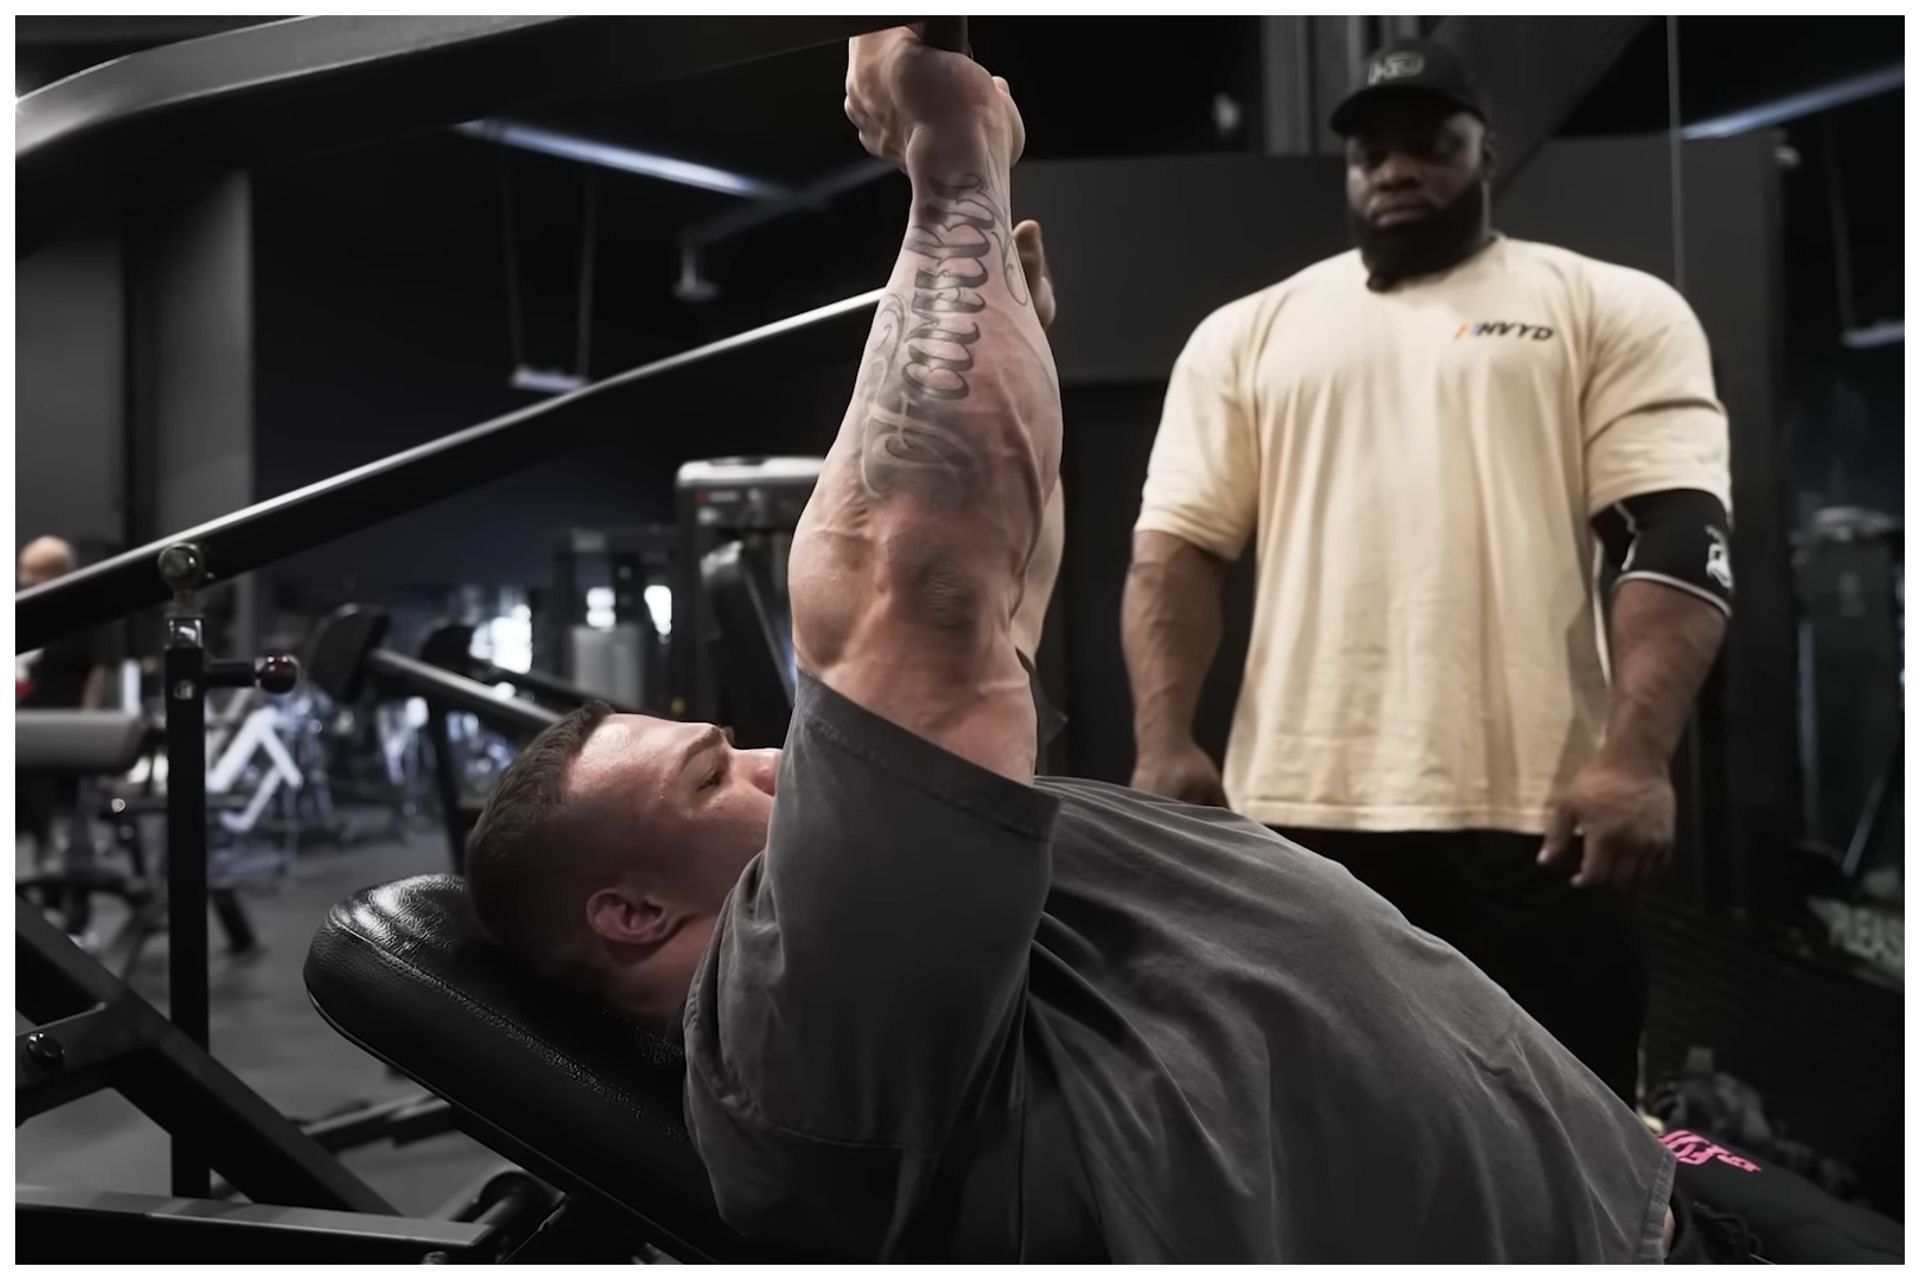 Nick Walker performs the inclined press as Quinton Eriya watches on: Image via YouTube (@HD Muscle)